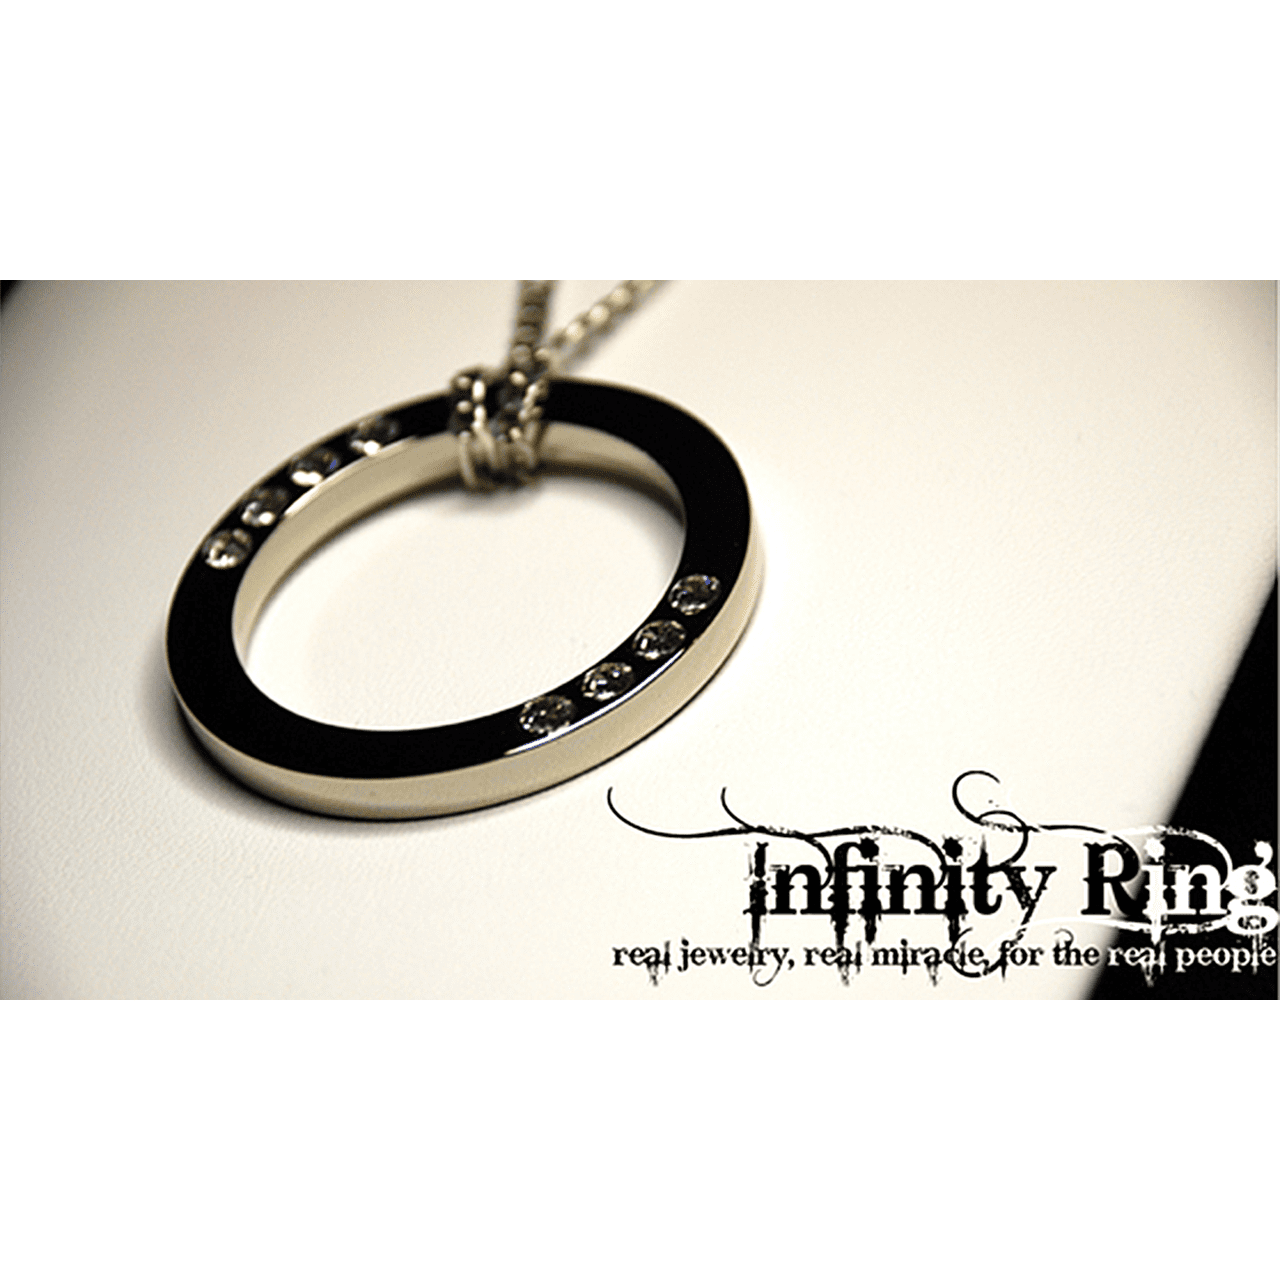 Infinity Ring by Will Tsai and SansMinds - Trick